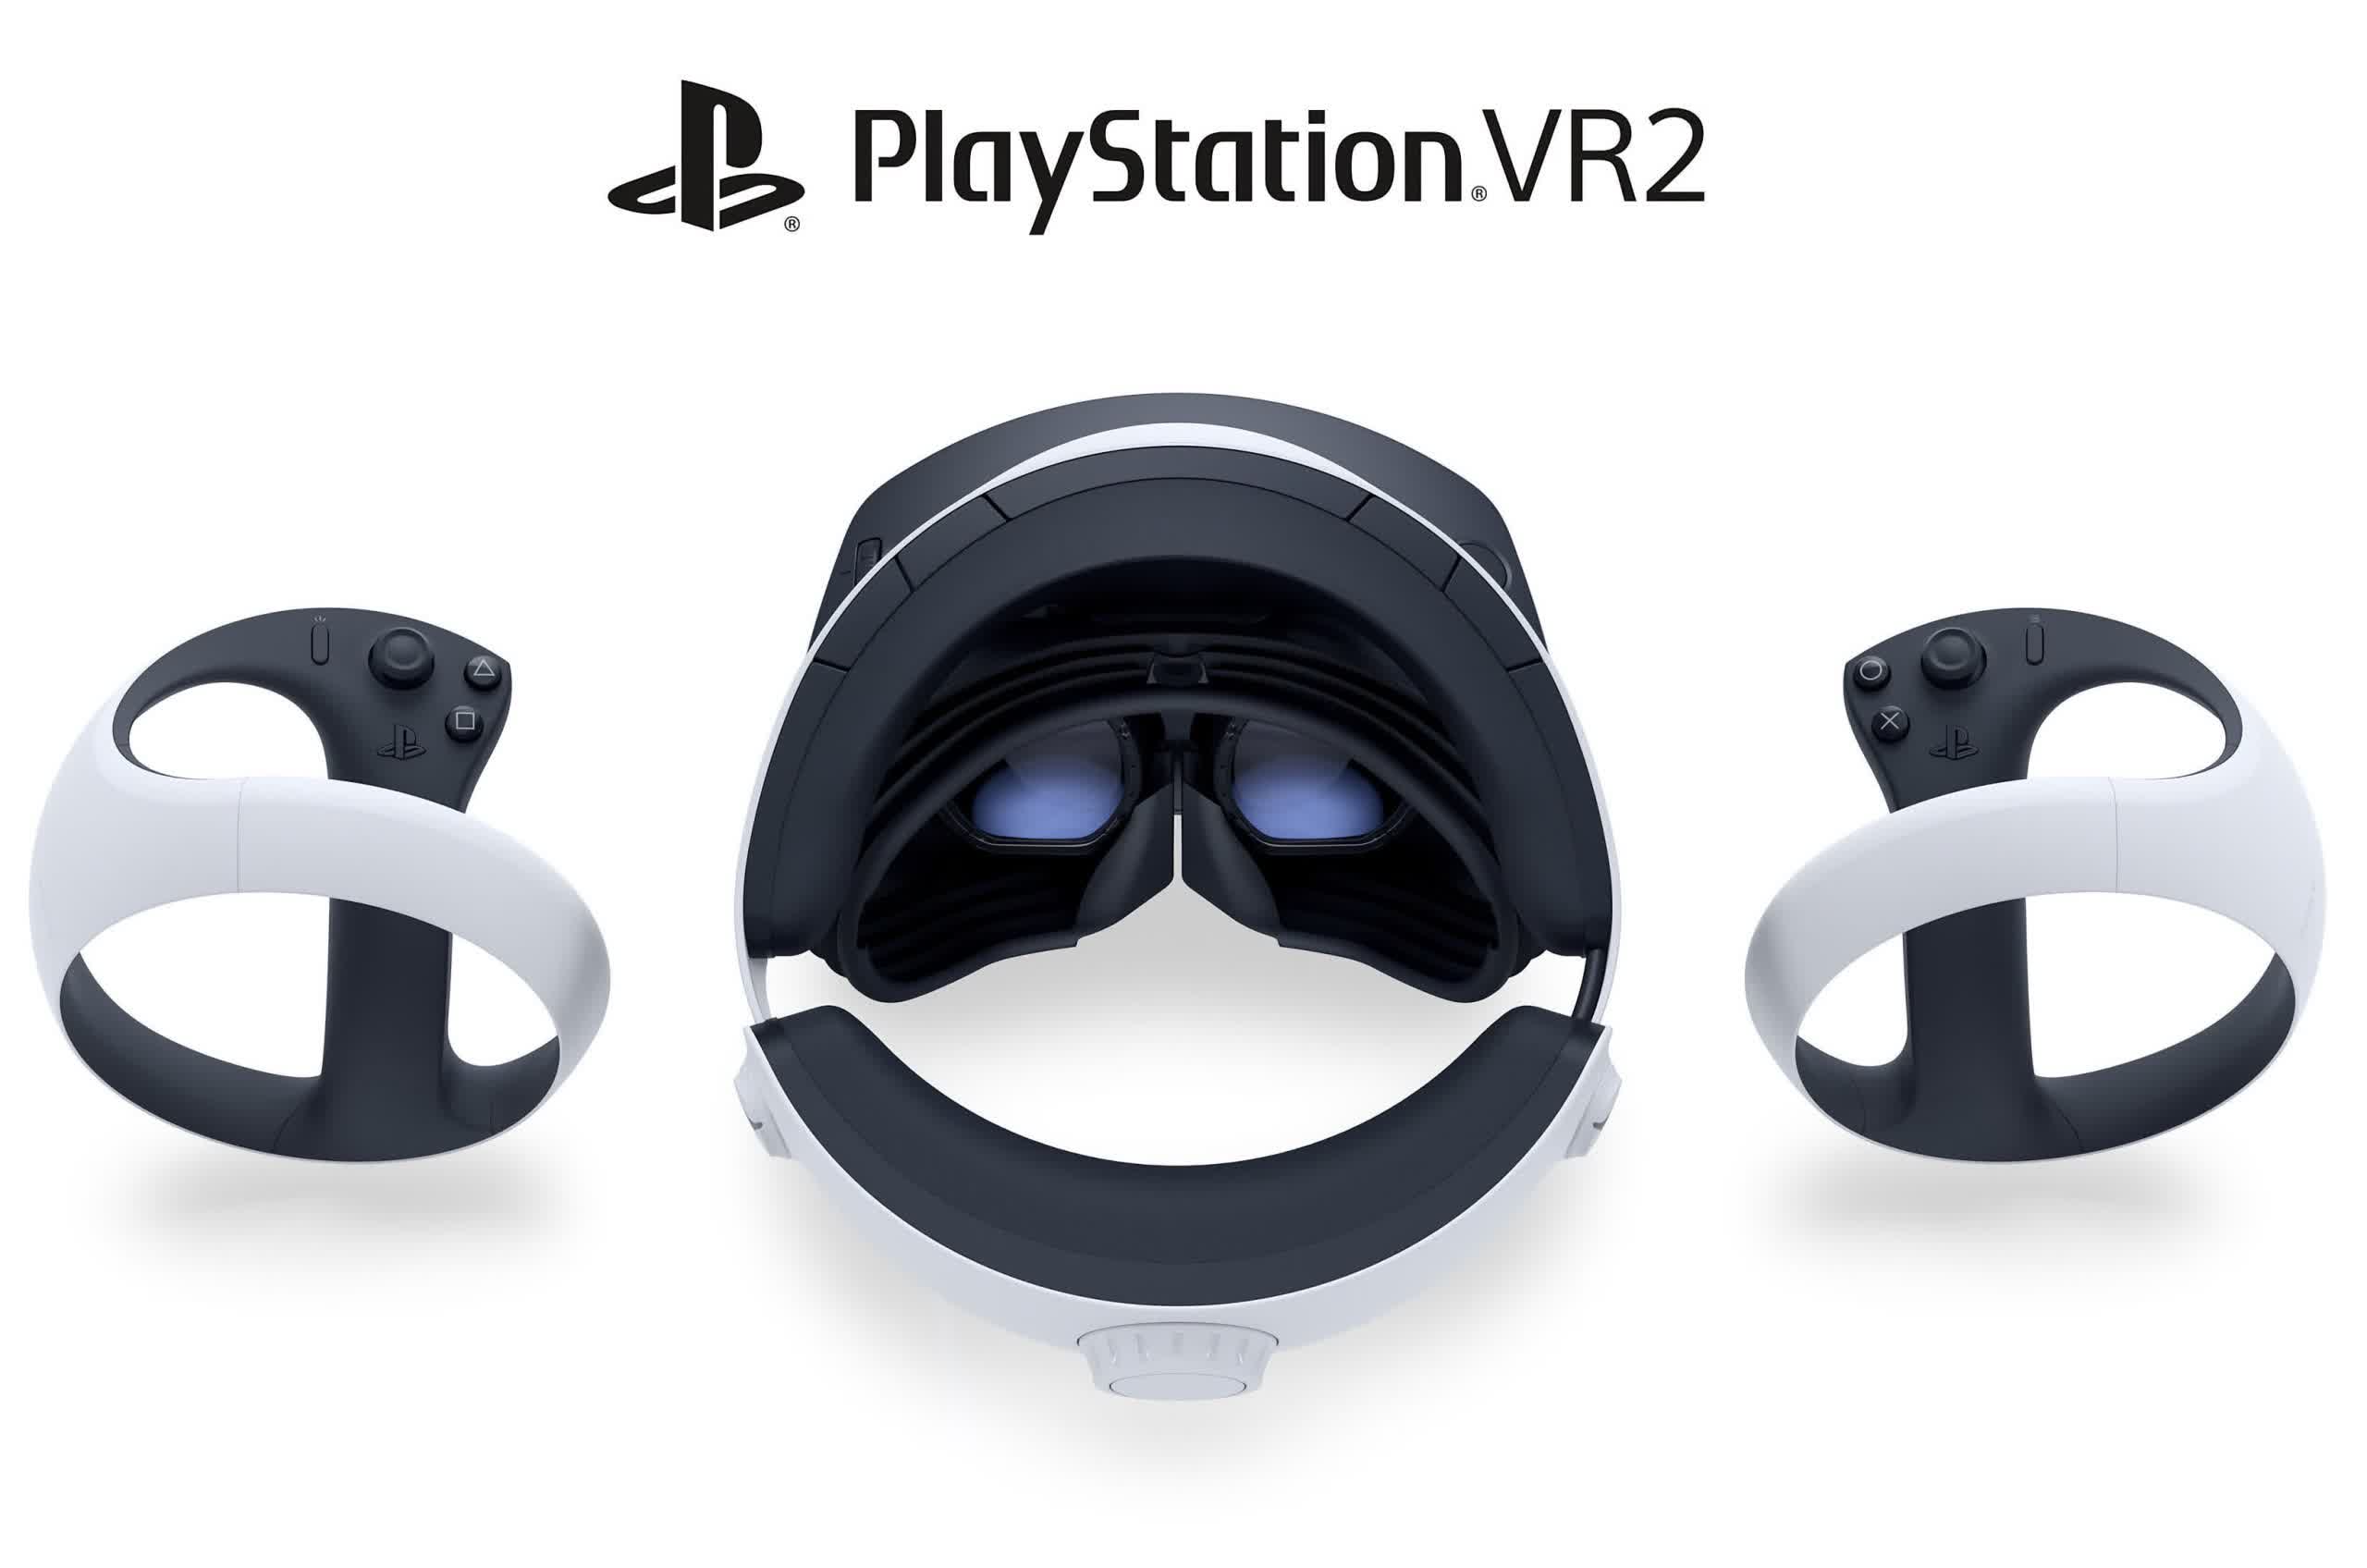 Sony claims it has over 20 major launch titles planned for the PlayStation VR2